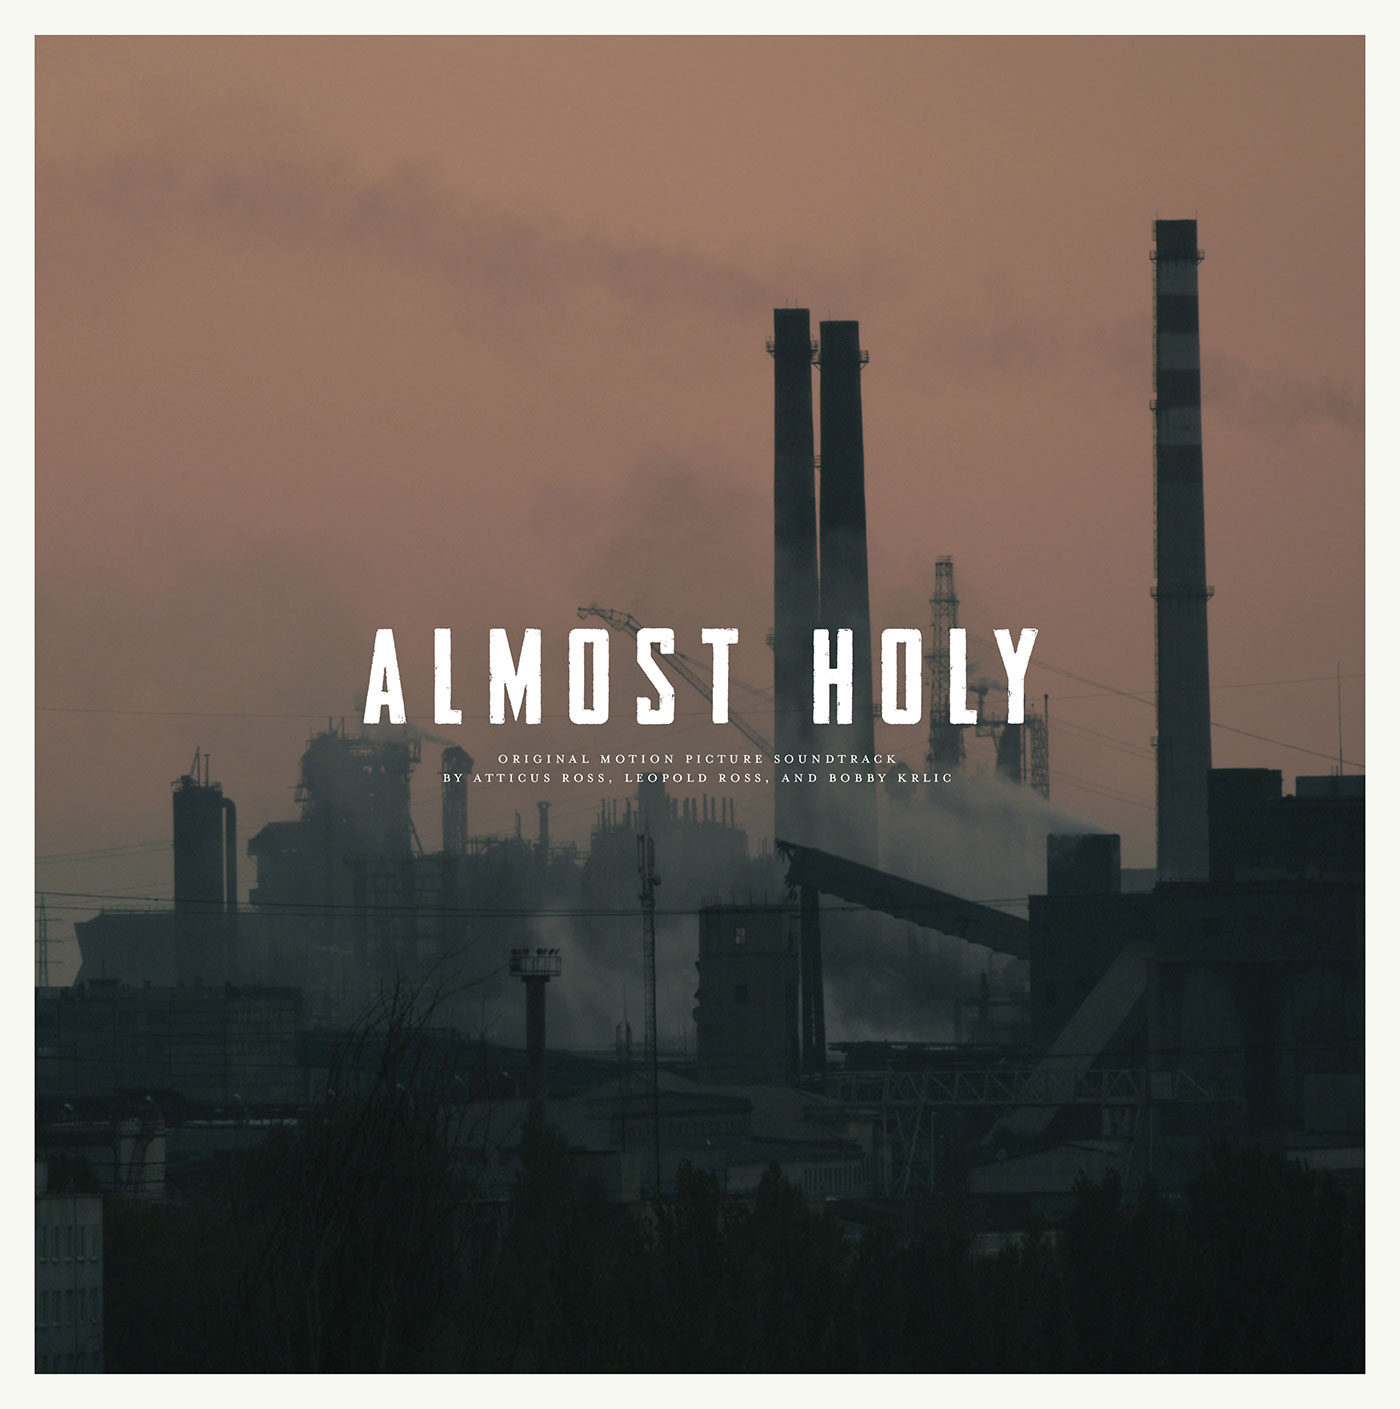 Almost Holy: Atticus Ross, Leopold Ross, and Bobby Krlic